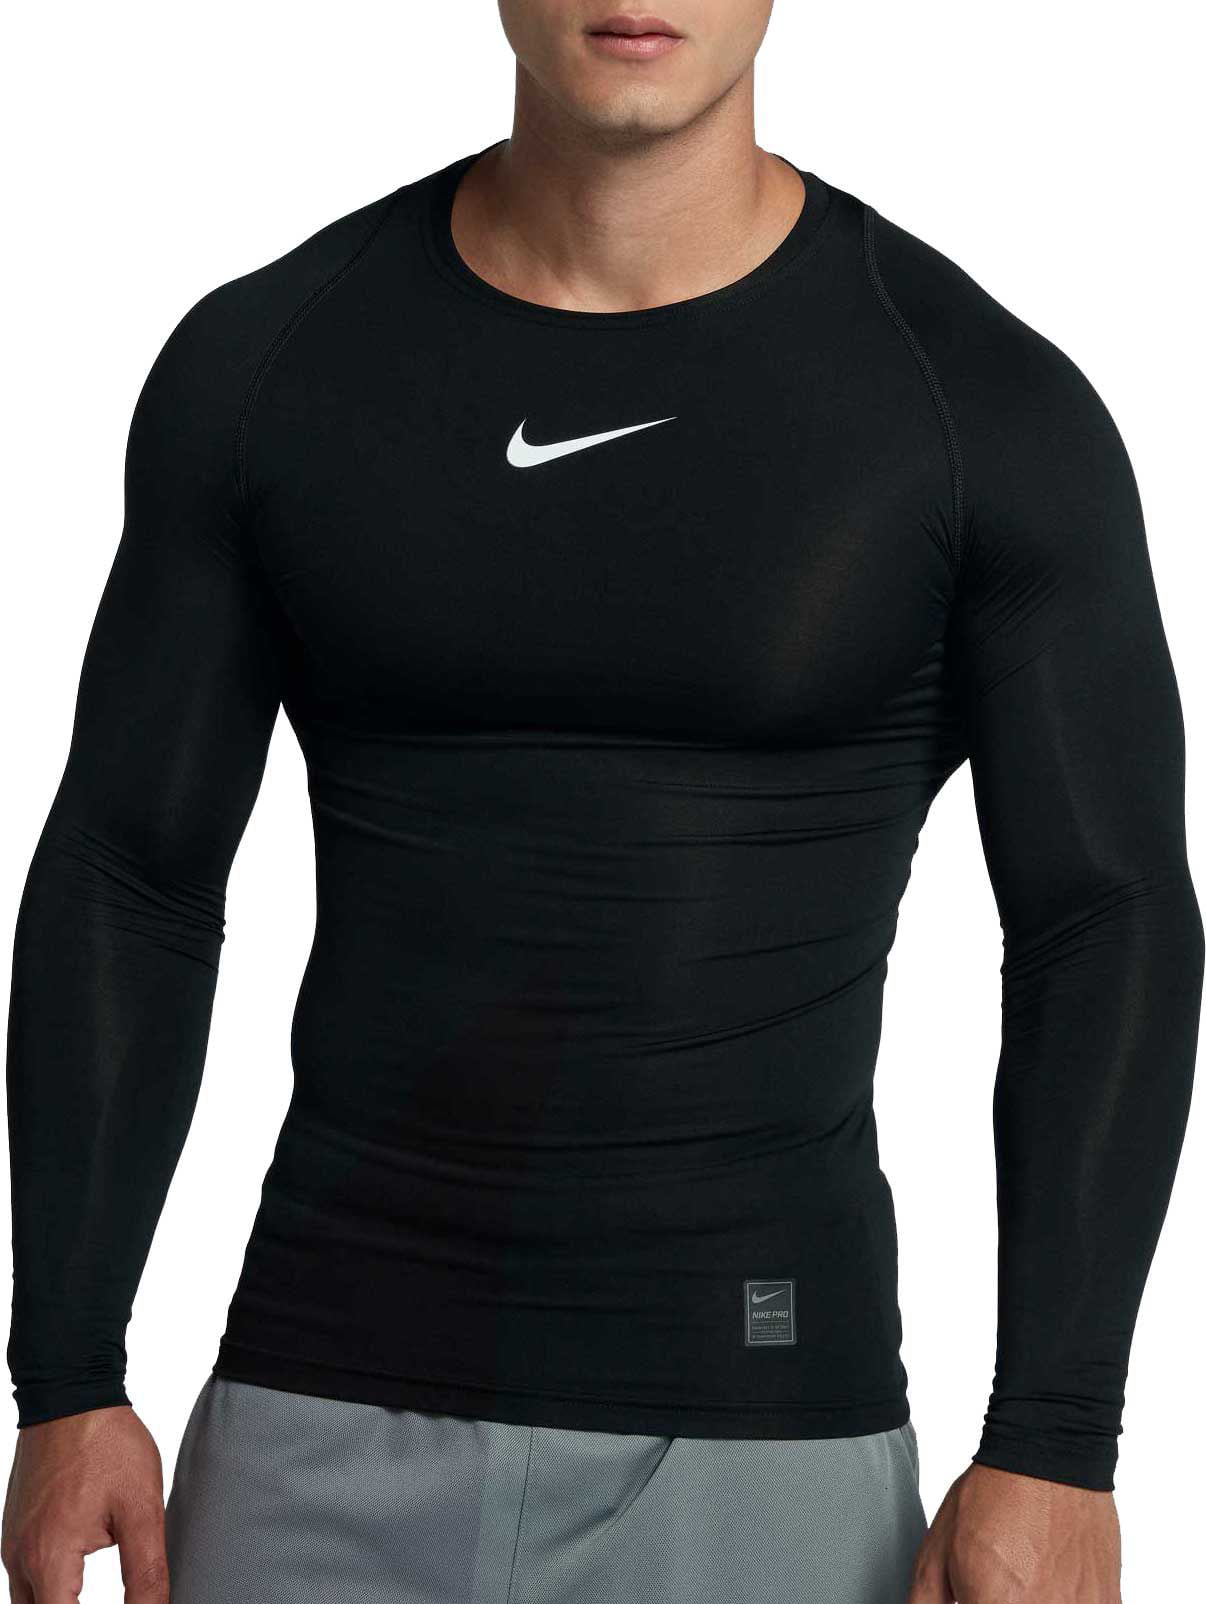 Nike Men's Pro Long Sleeve Compression Top